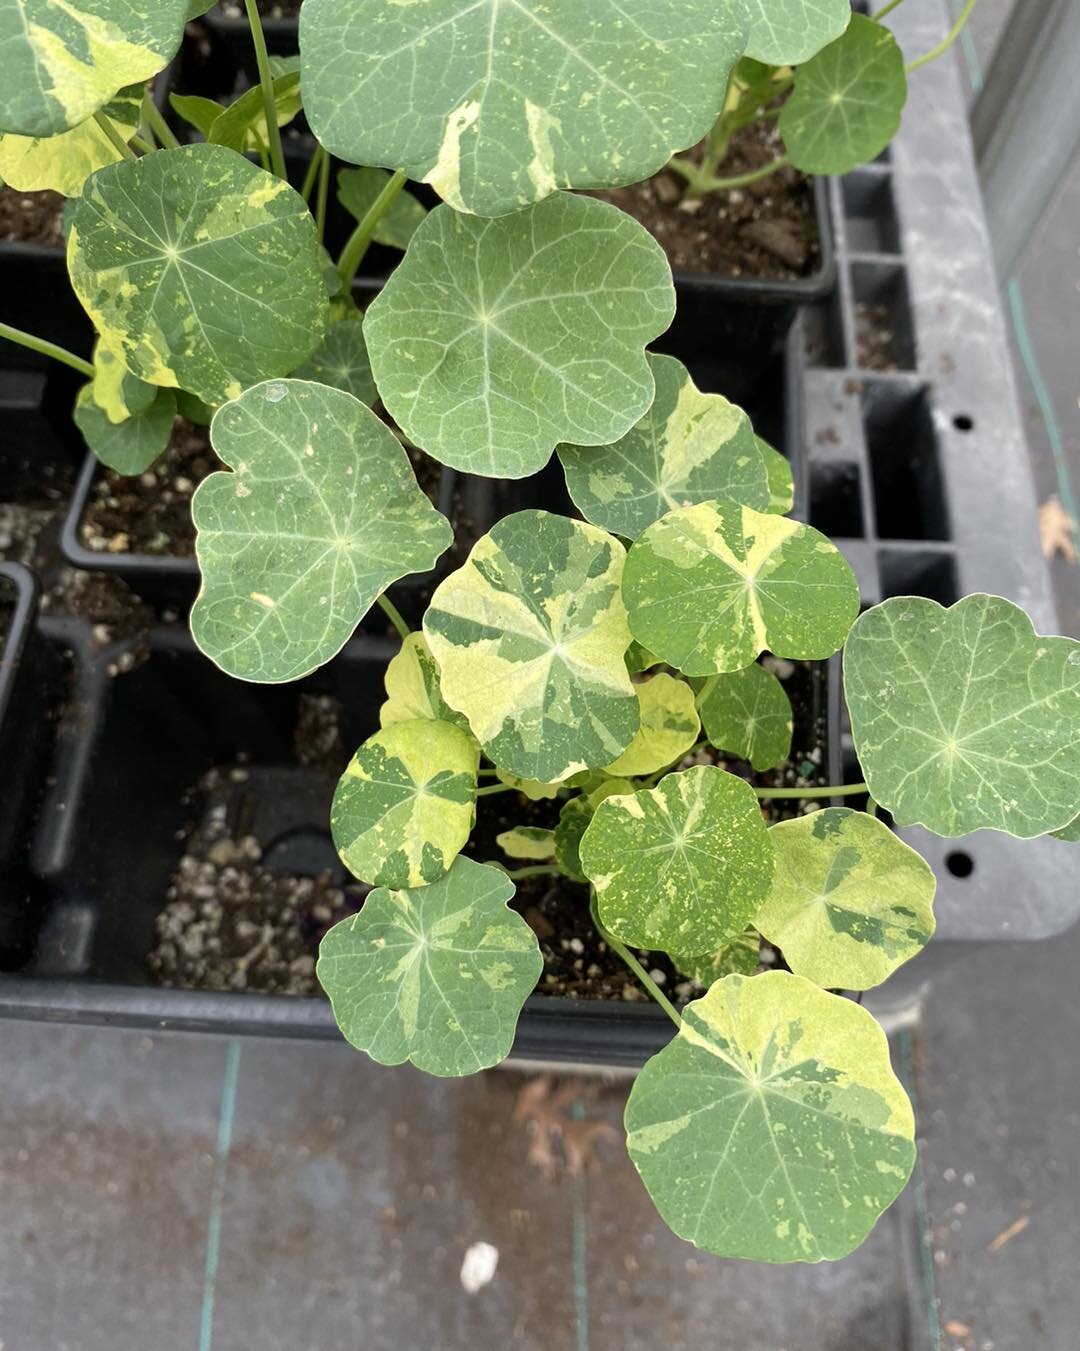 We have three different nasturtium varieties in 4 inch and quart-sized pots.  These annuals do wonderful this time of year and the flowers are tasty additions to a salad.